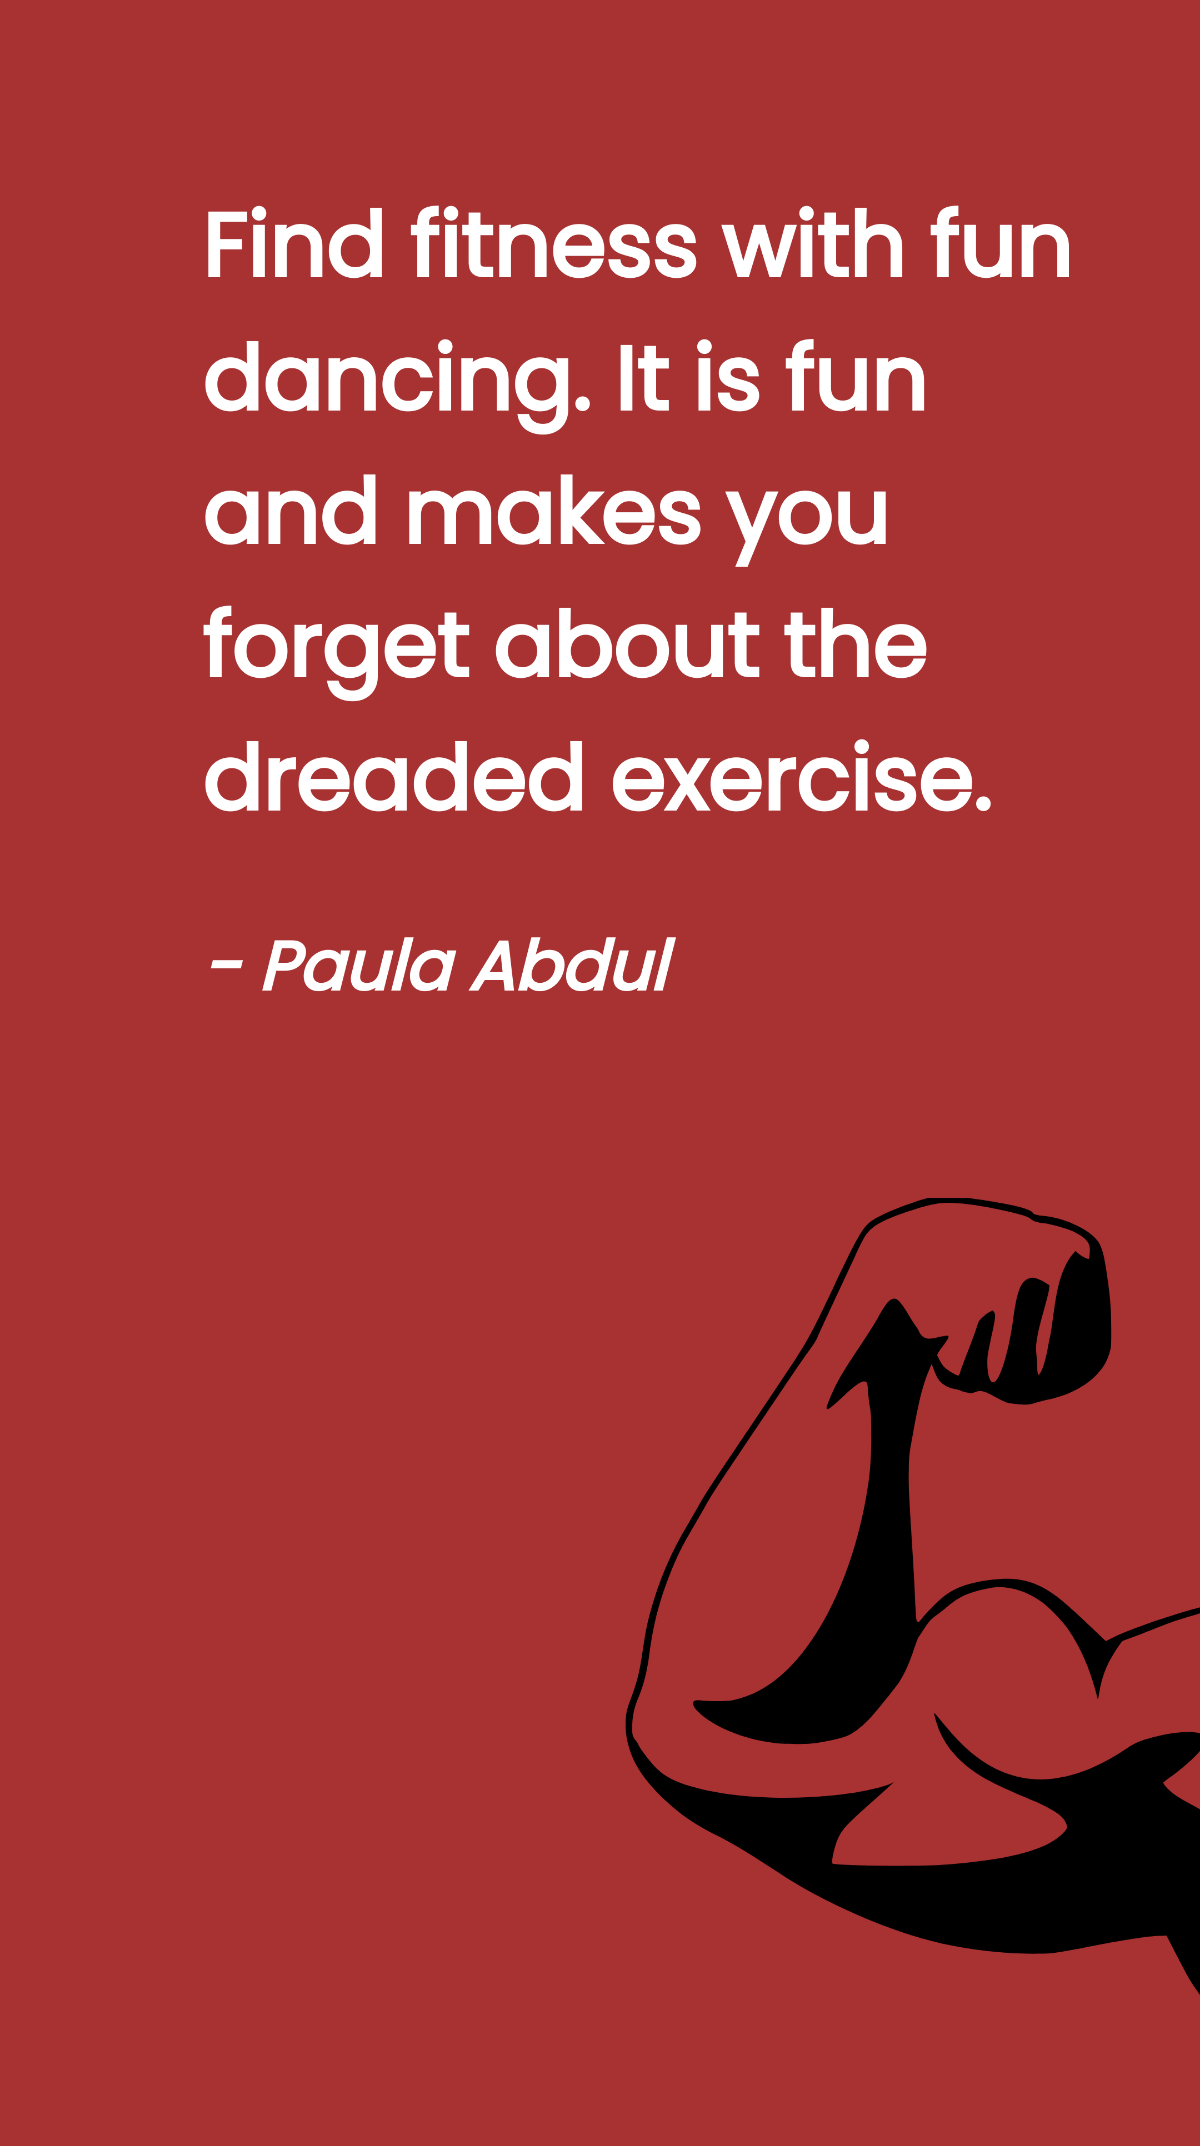 Free Paula Abdul - Find fitness with fun dancing. It is fun and makes you forget about the dreaded exercise. - Paula Abdul Template